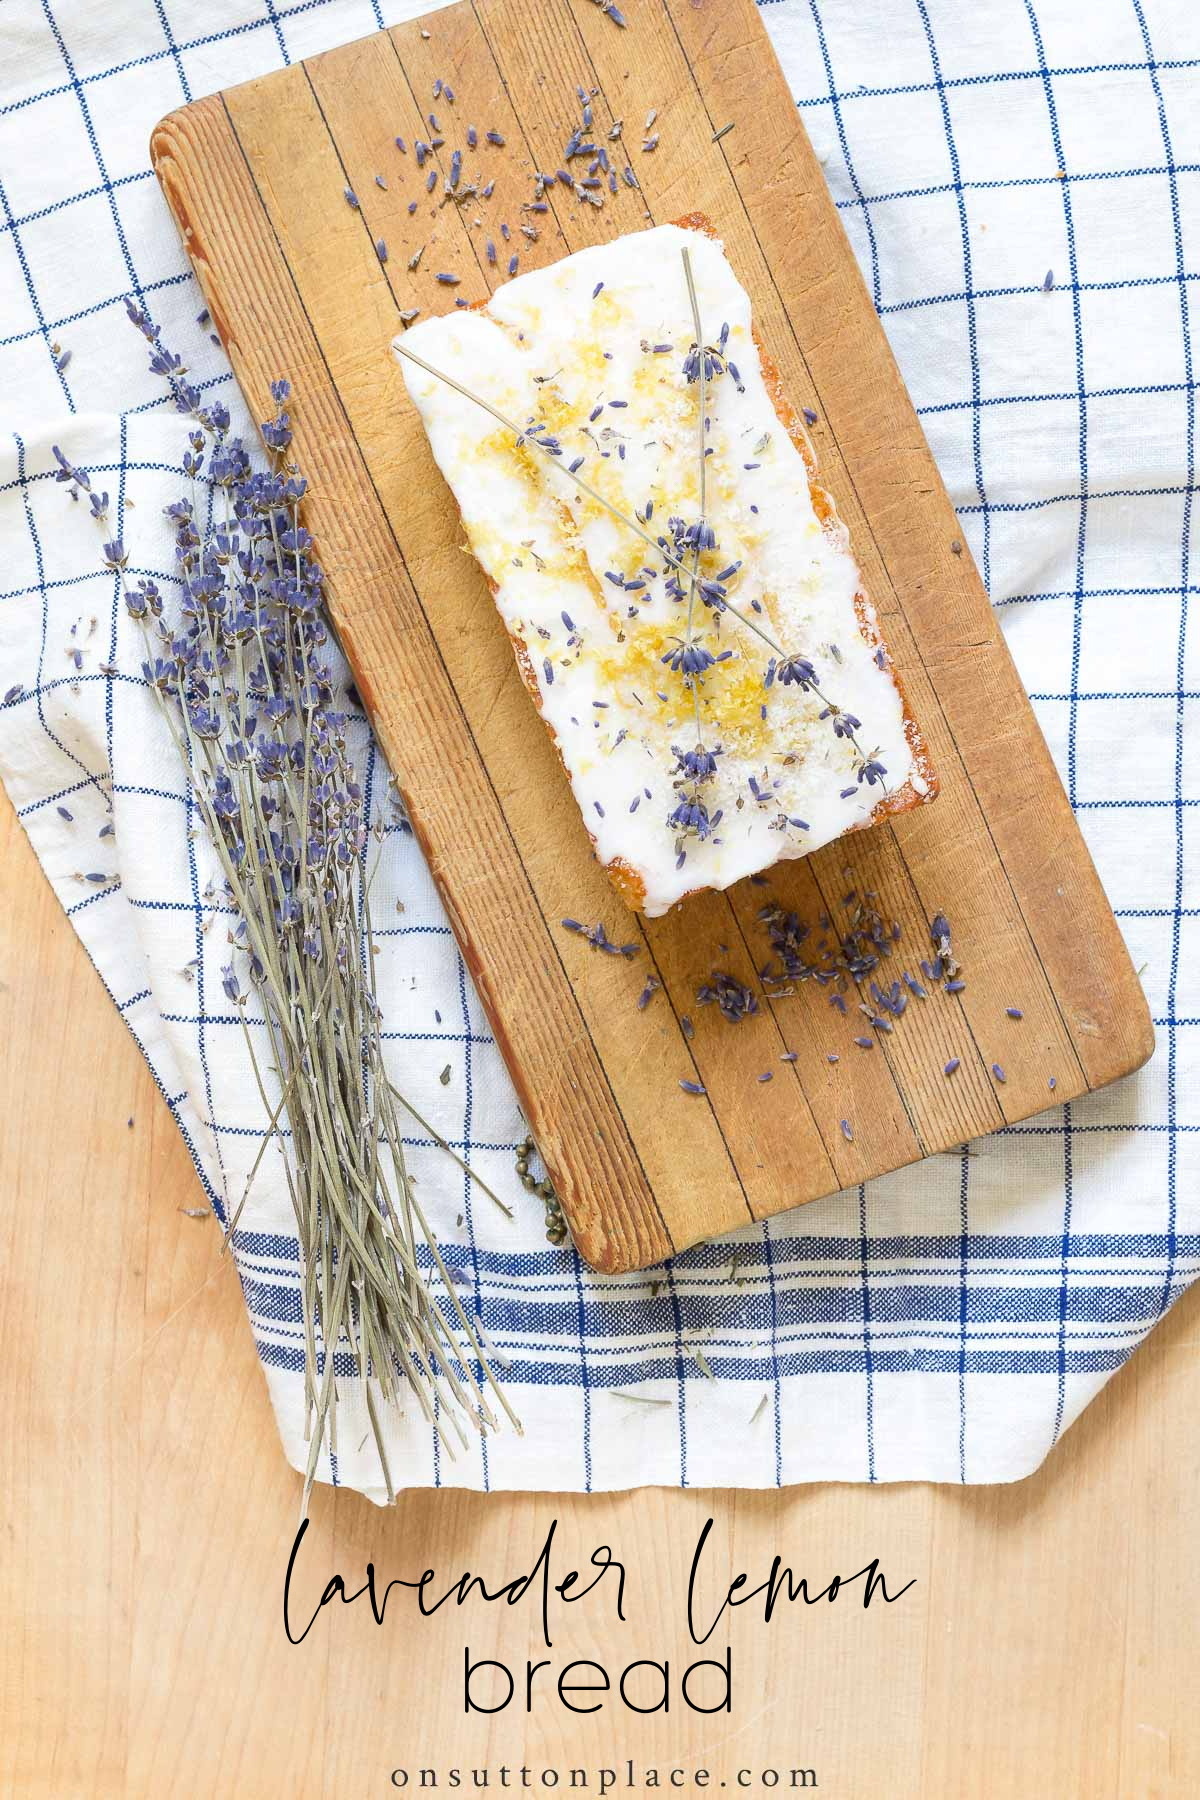 Try Something New: Lavender Lemon Bread - On Sutton Place